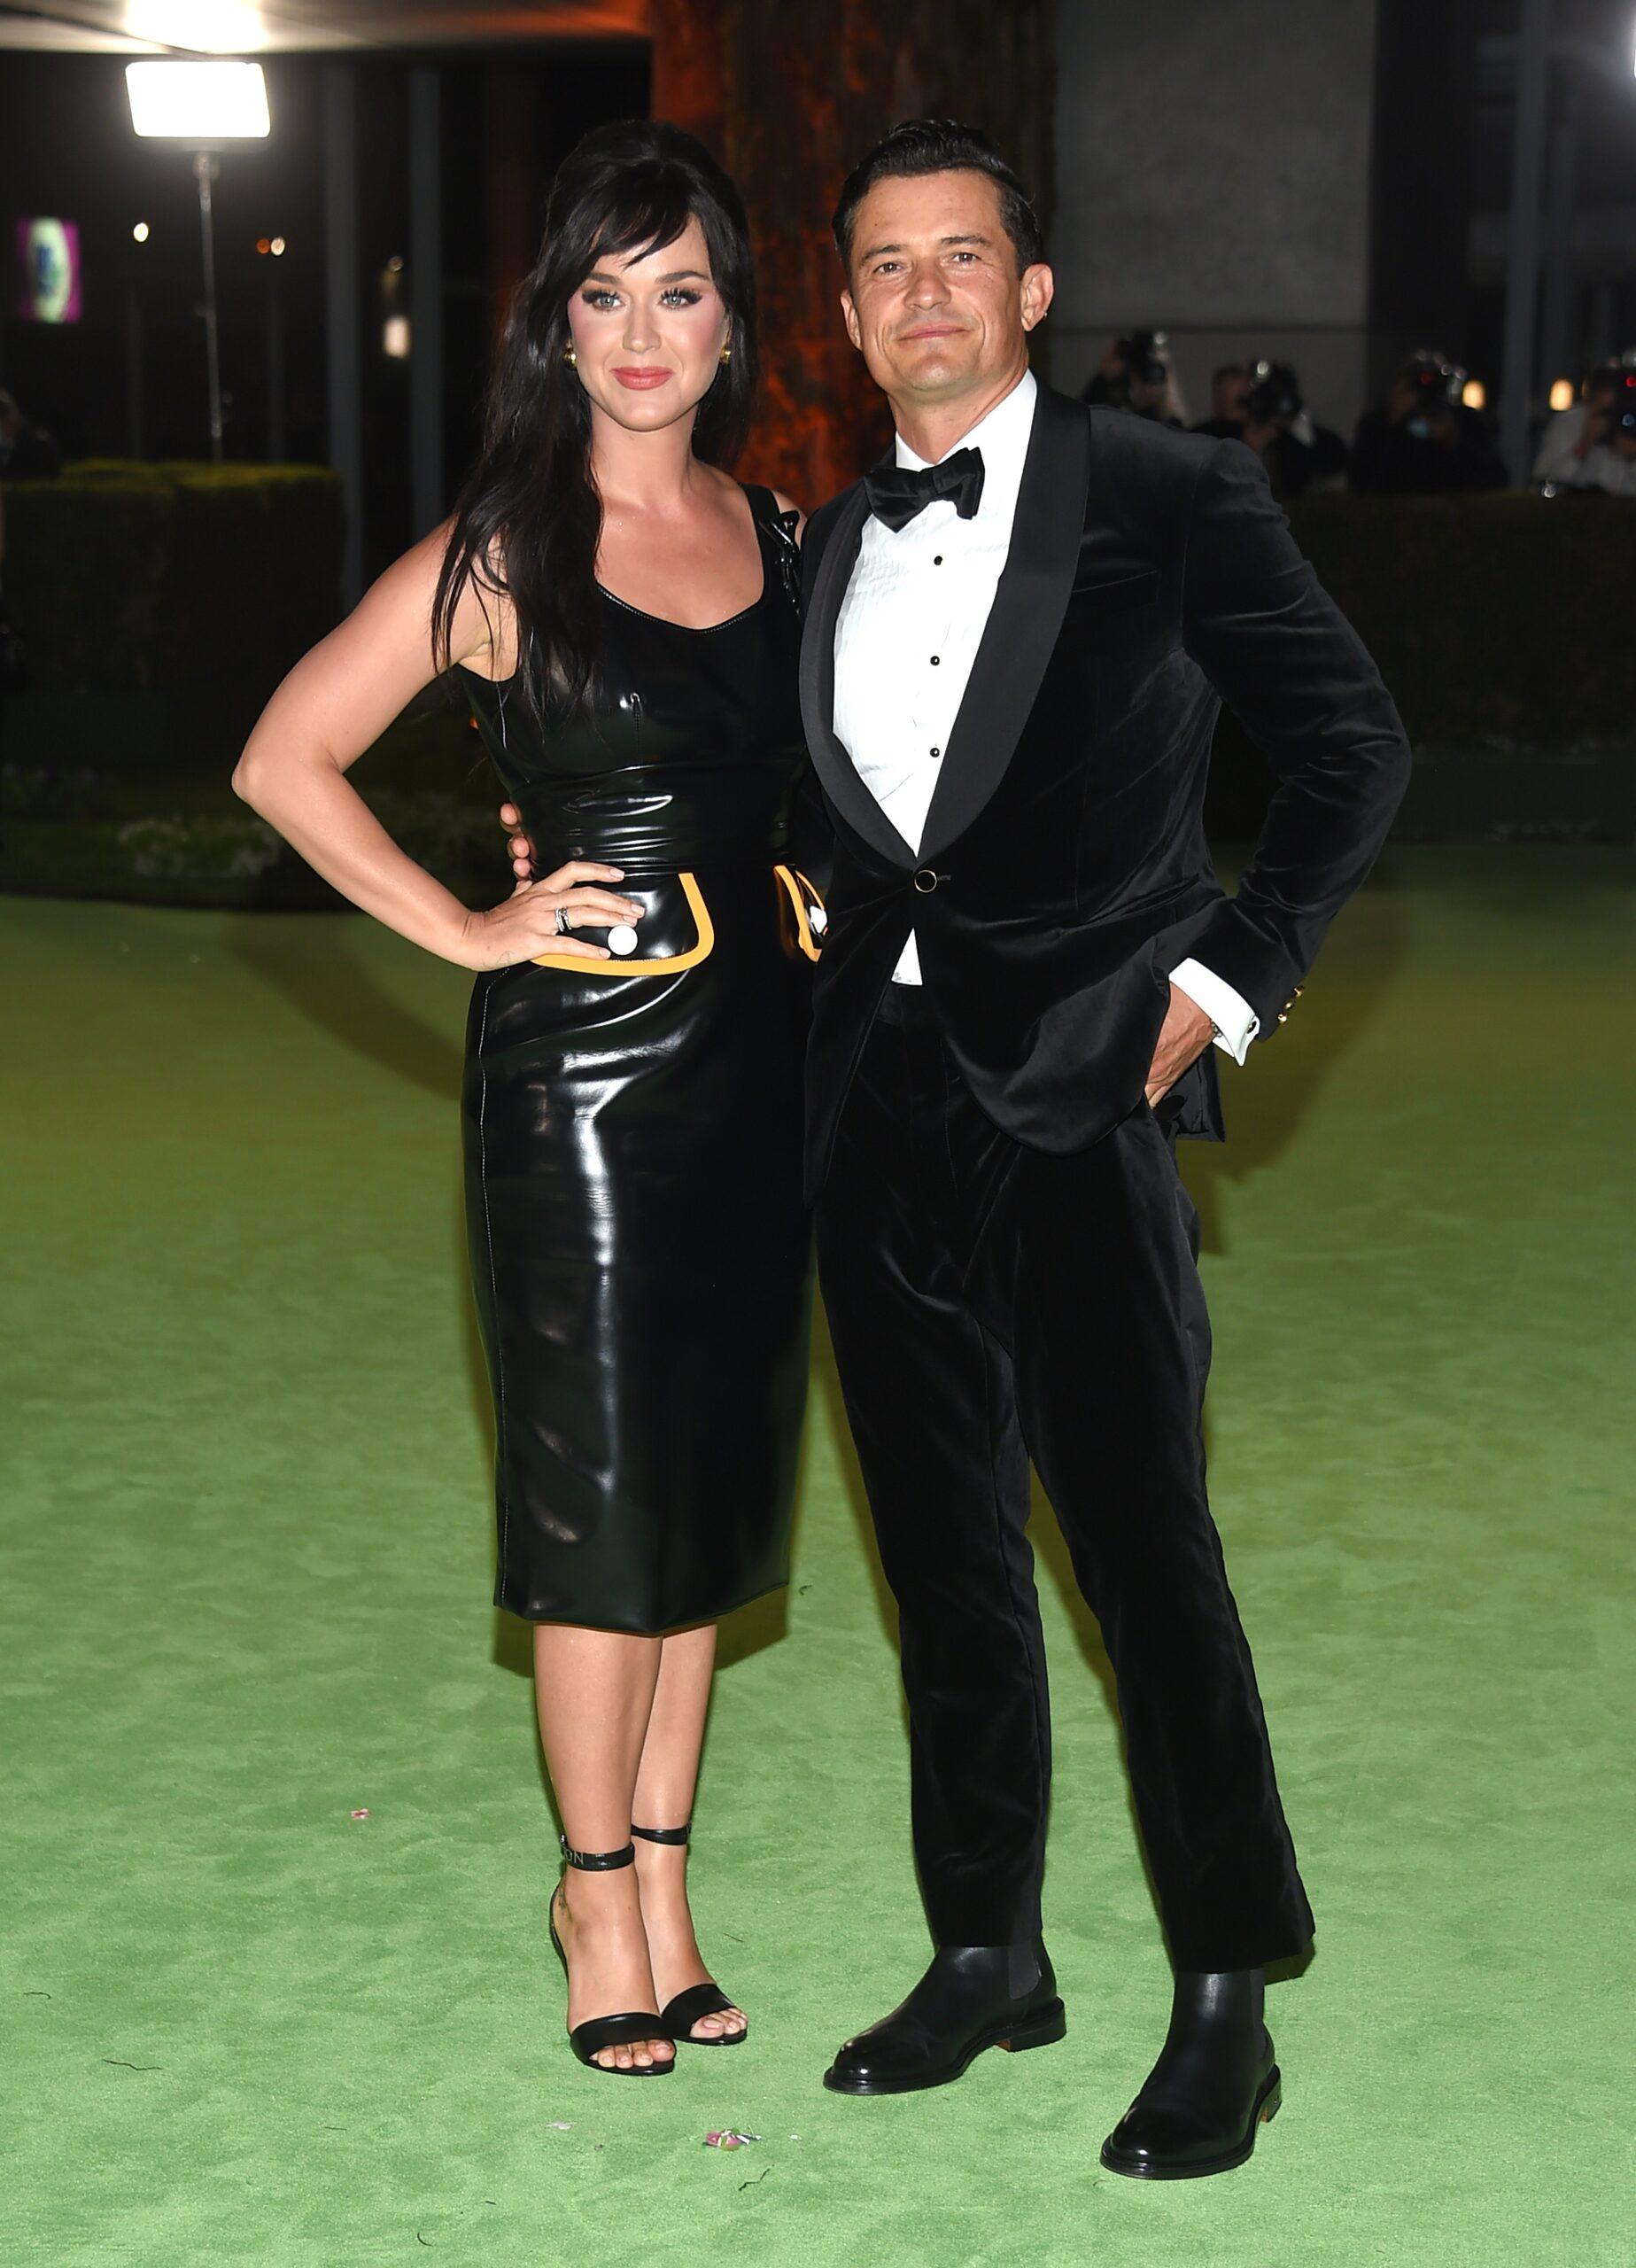 Orlando Bloom & Katy Perry at the Academy Museum of Motion Pictures opening Gala